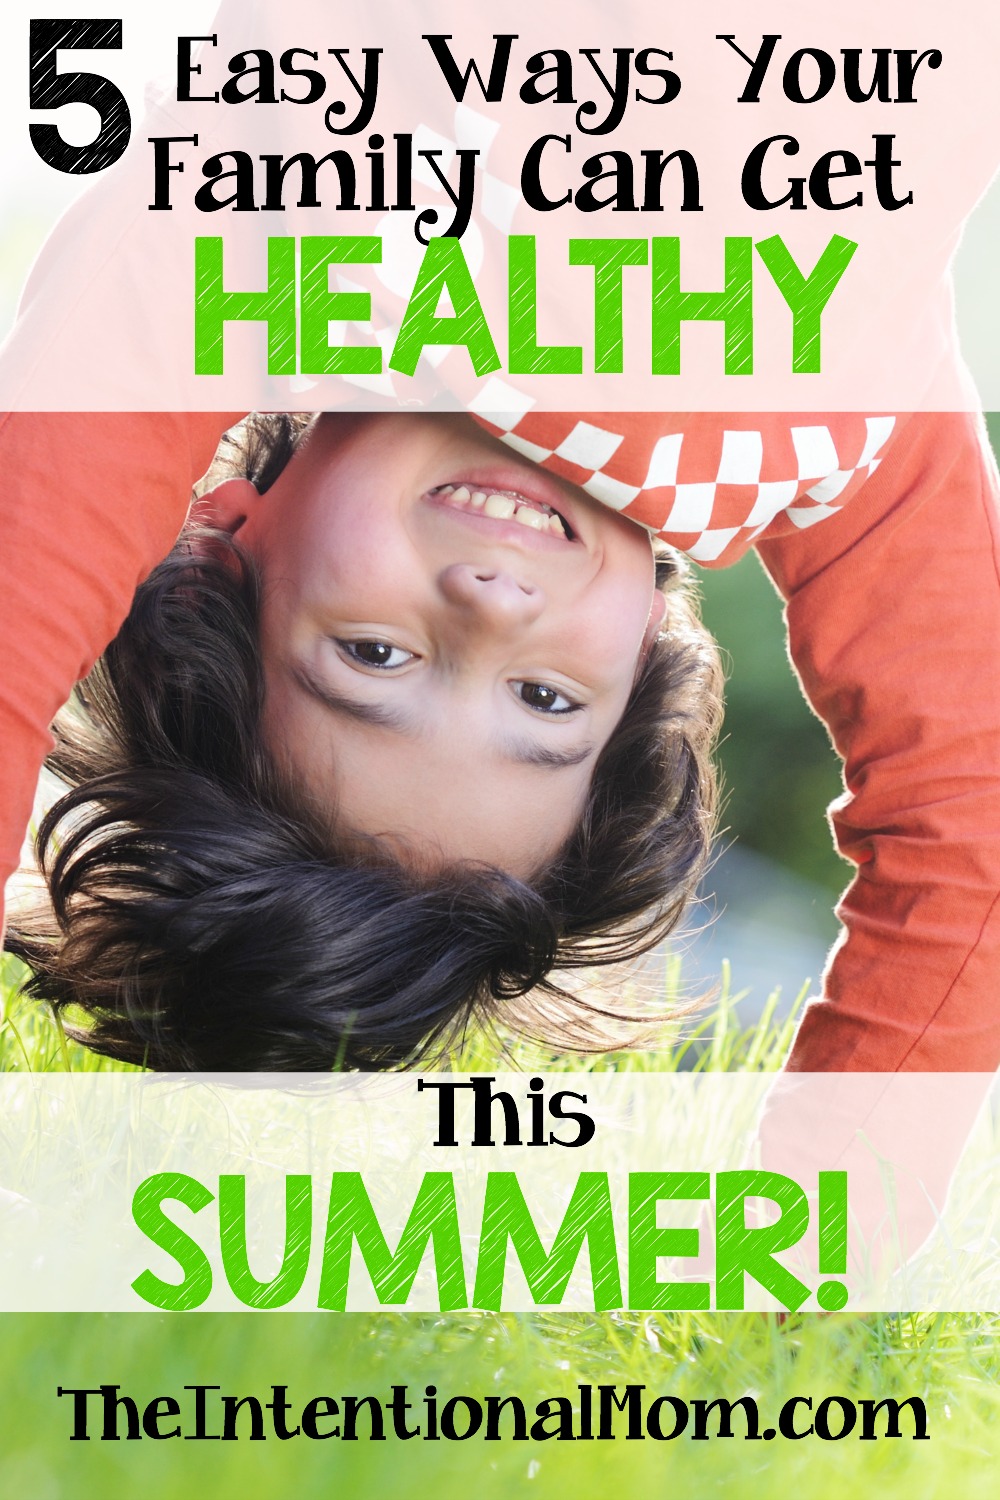 5 Easy Ways Your Family Can Get Healthy This Summer